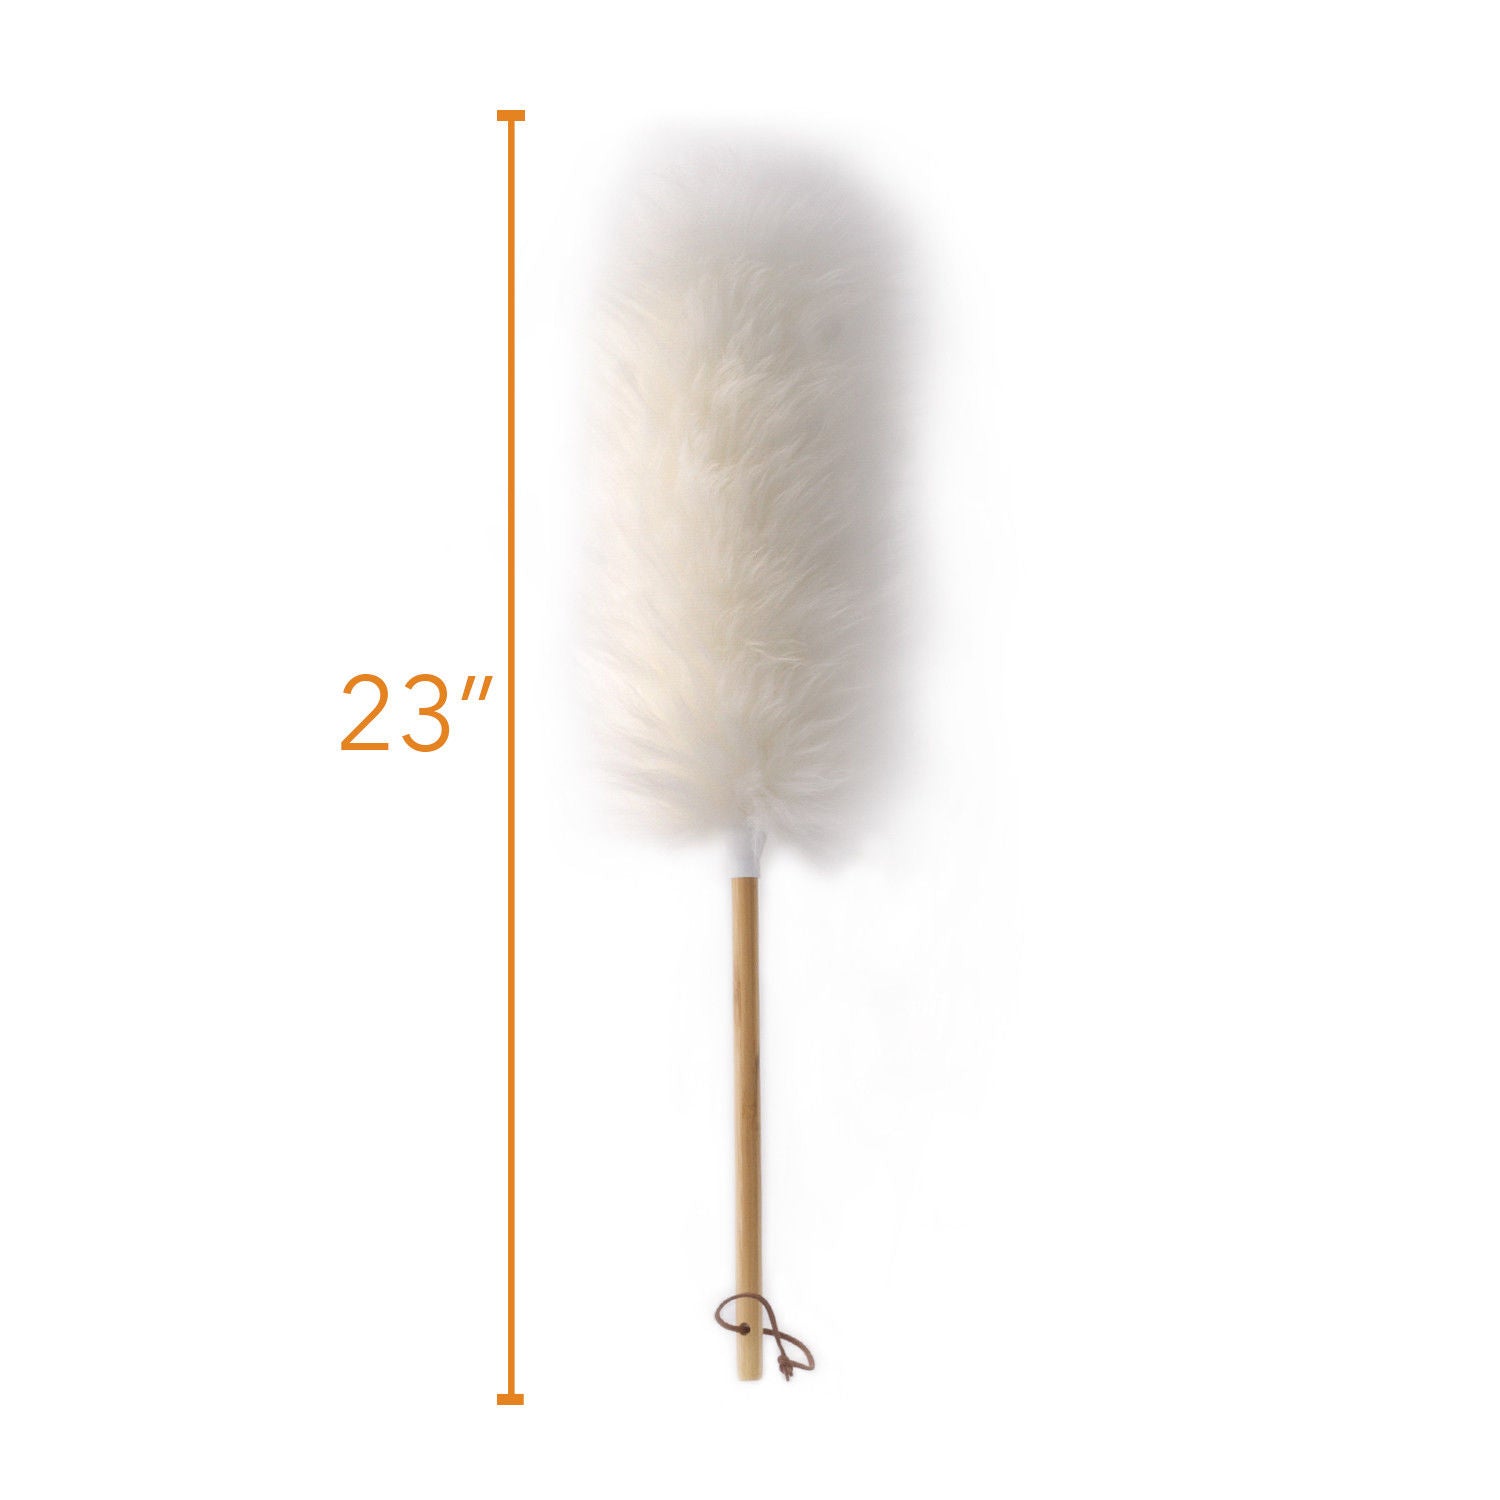 Long Duster With Wooden Handle - Cobweb 23" Daster W/ Wood Handle